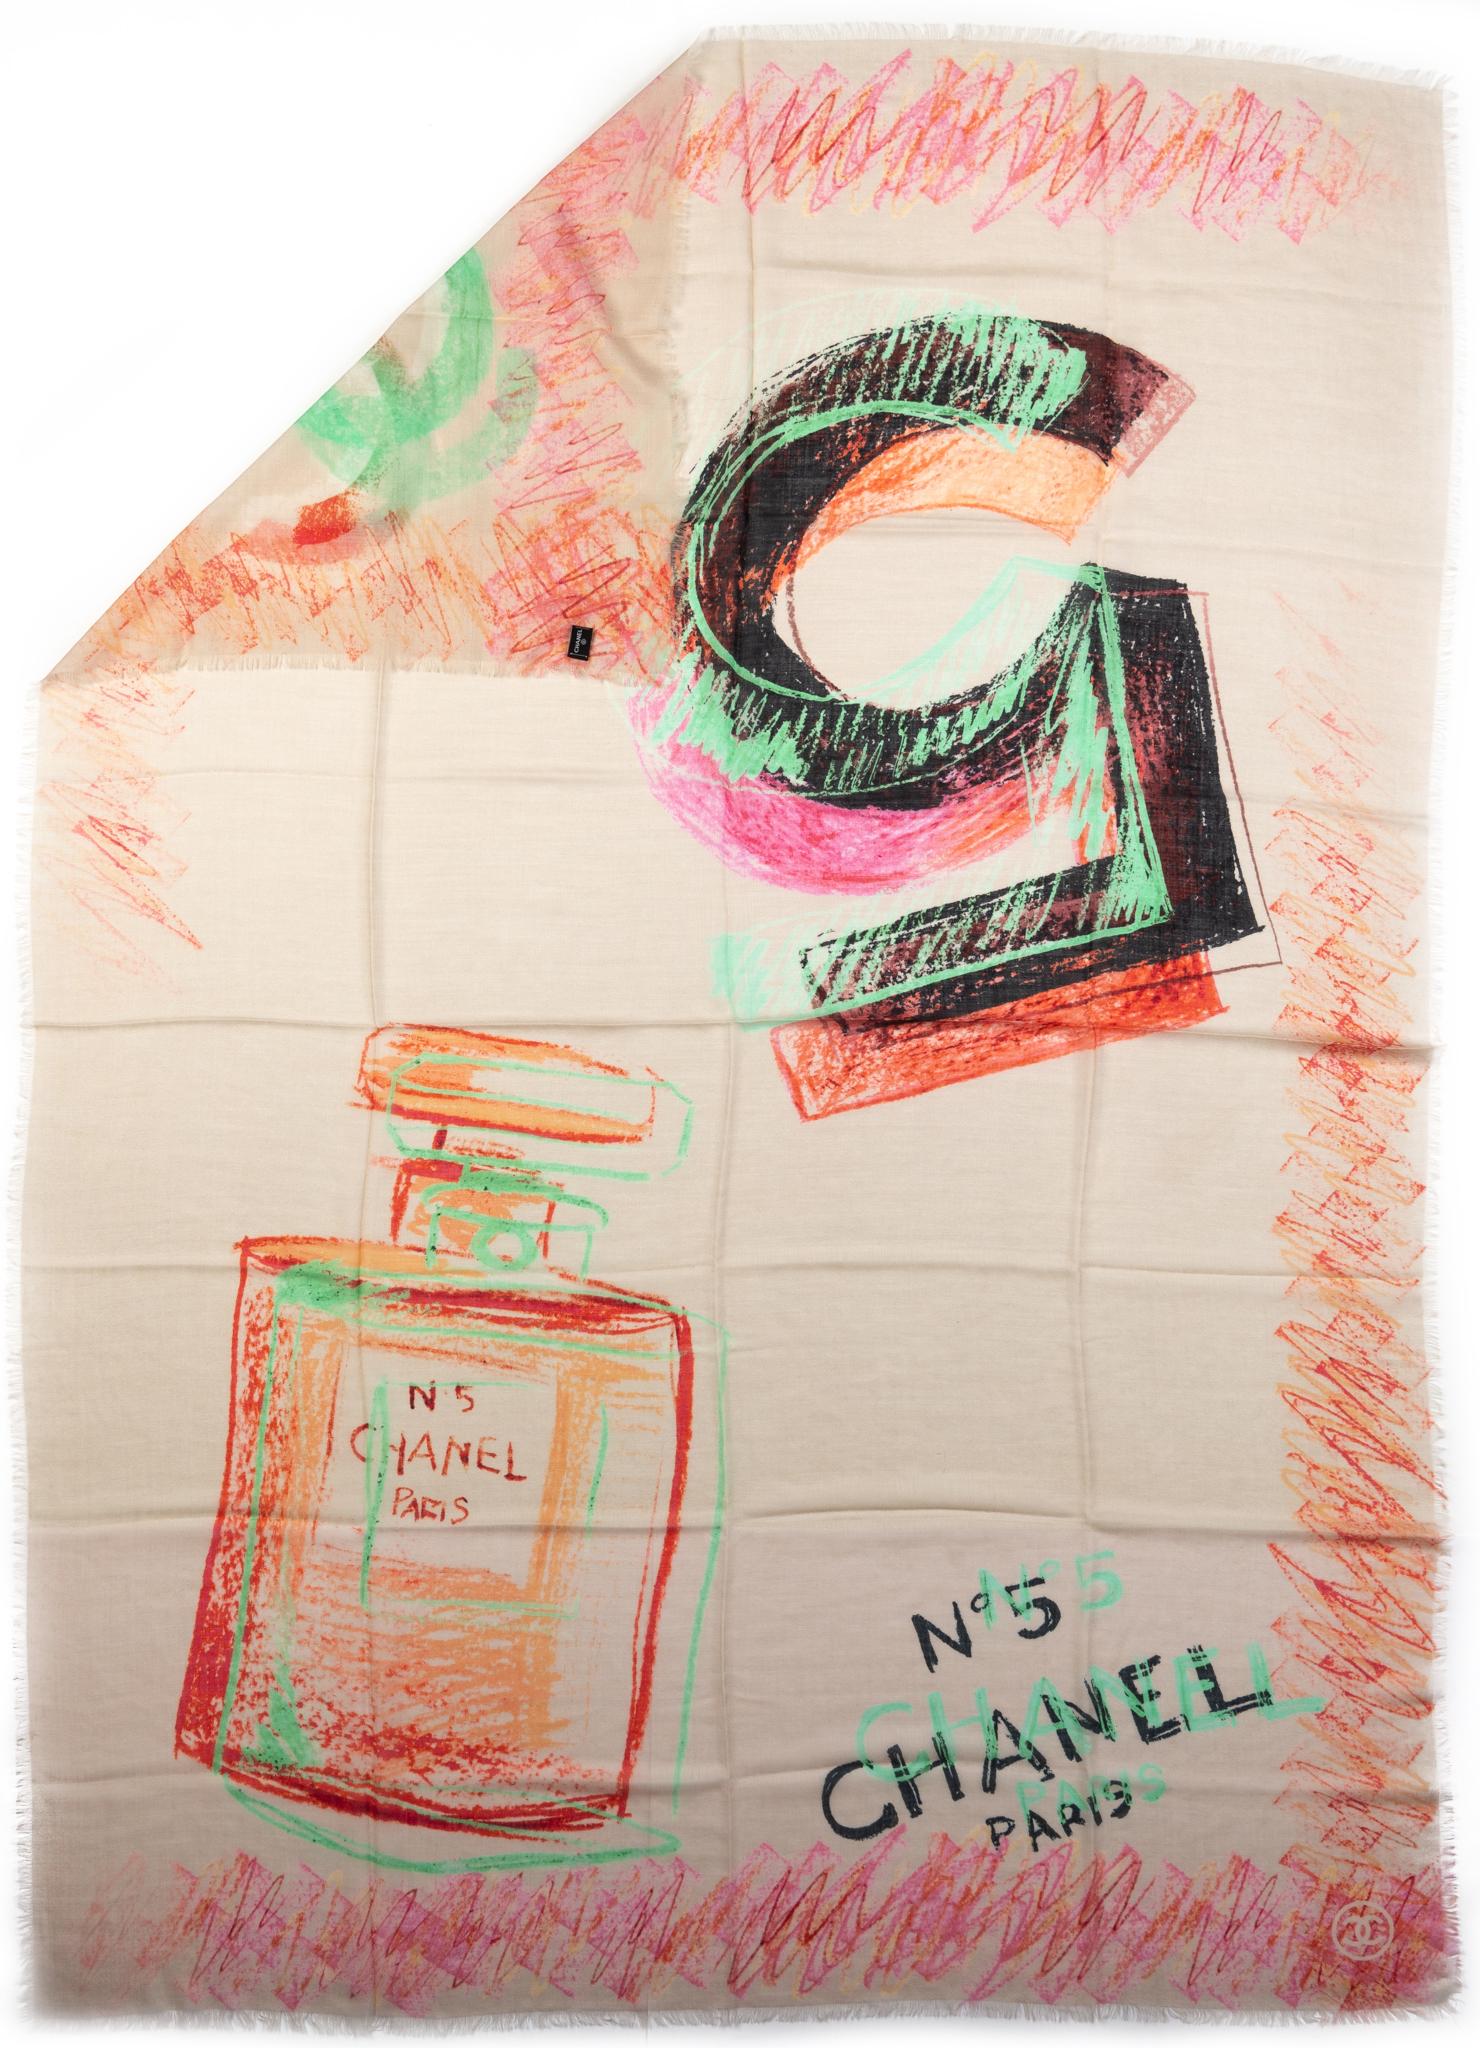 Chanel brand new cashmere and silk off white no. 5, perfume bottle logo design shawl. Care tag.